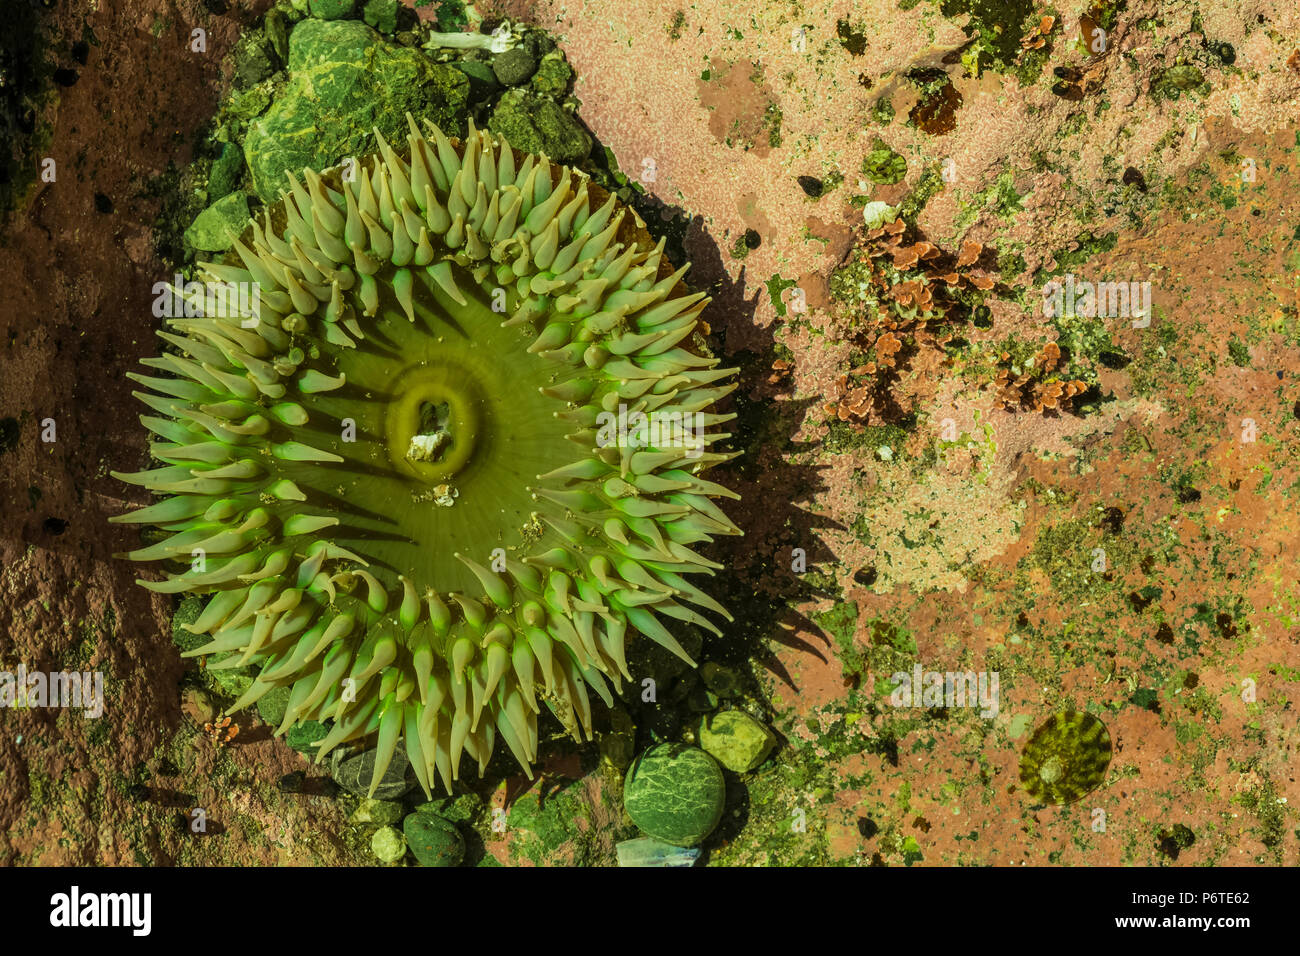 Giant Green Anemone, Anthopleura xanthogrammica, at Point of Arches along the Pacific Ocean in Olympic National Park, Washington State, USA Stock Photo